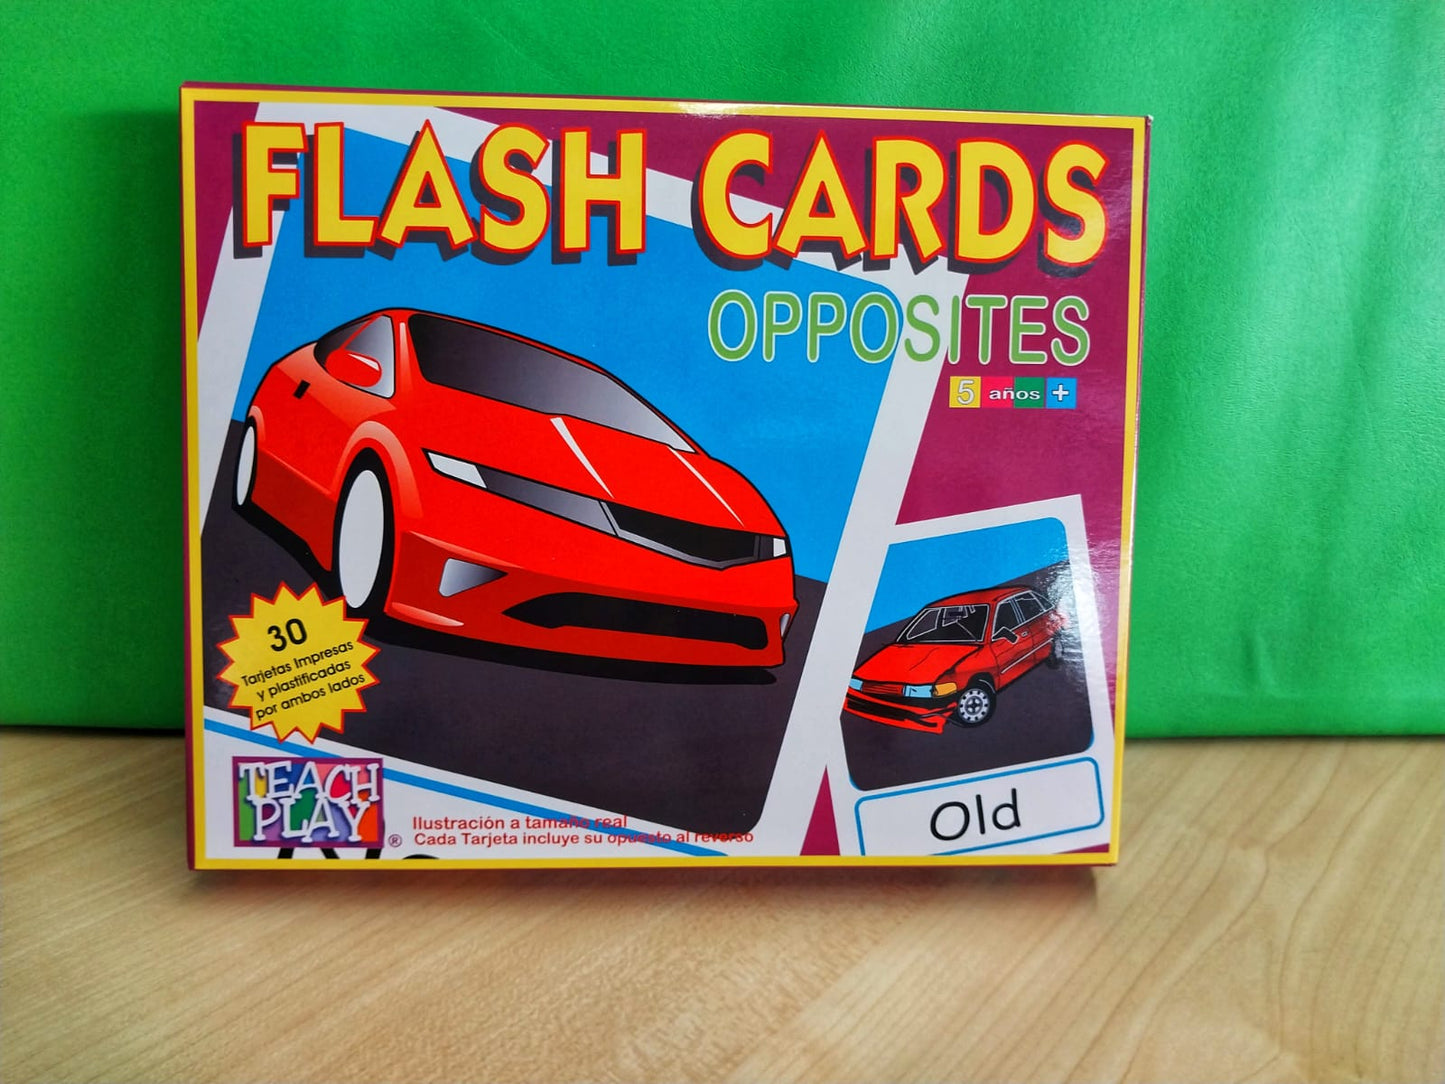 FLASH CARDS OPPOSITES